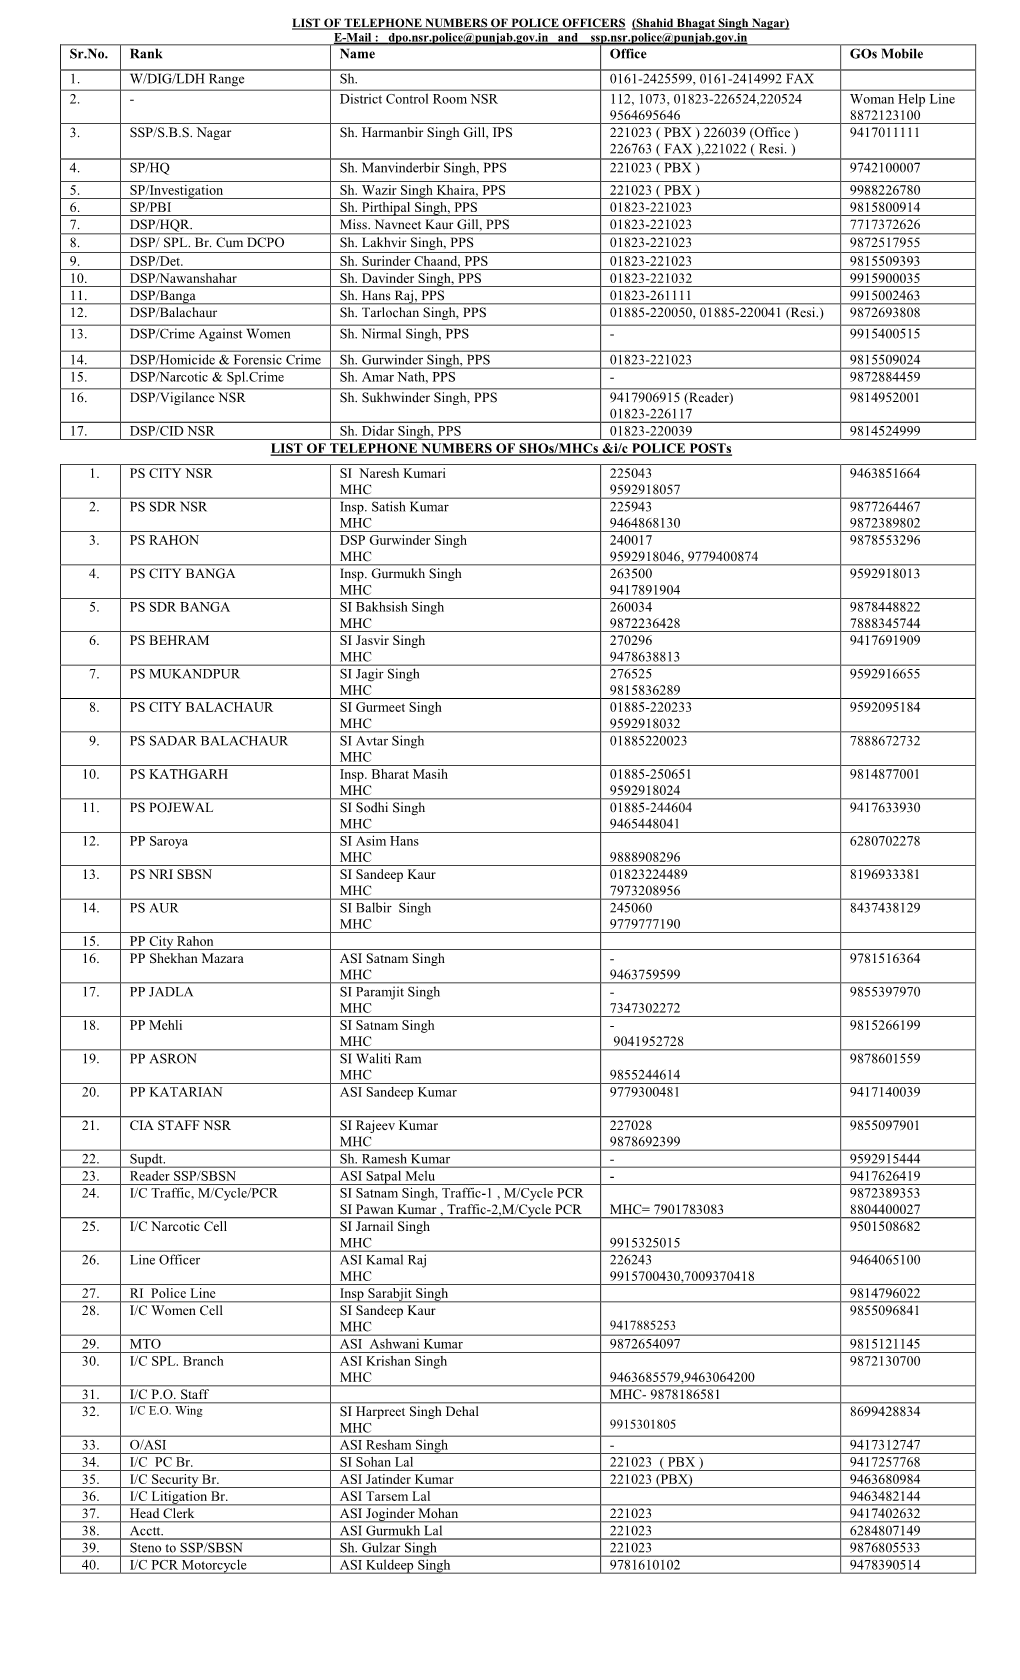 LIST of POLICE Officers and Readers/SHO/Mhcs in DISTRICT NAWANSHAHR